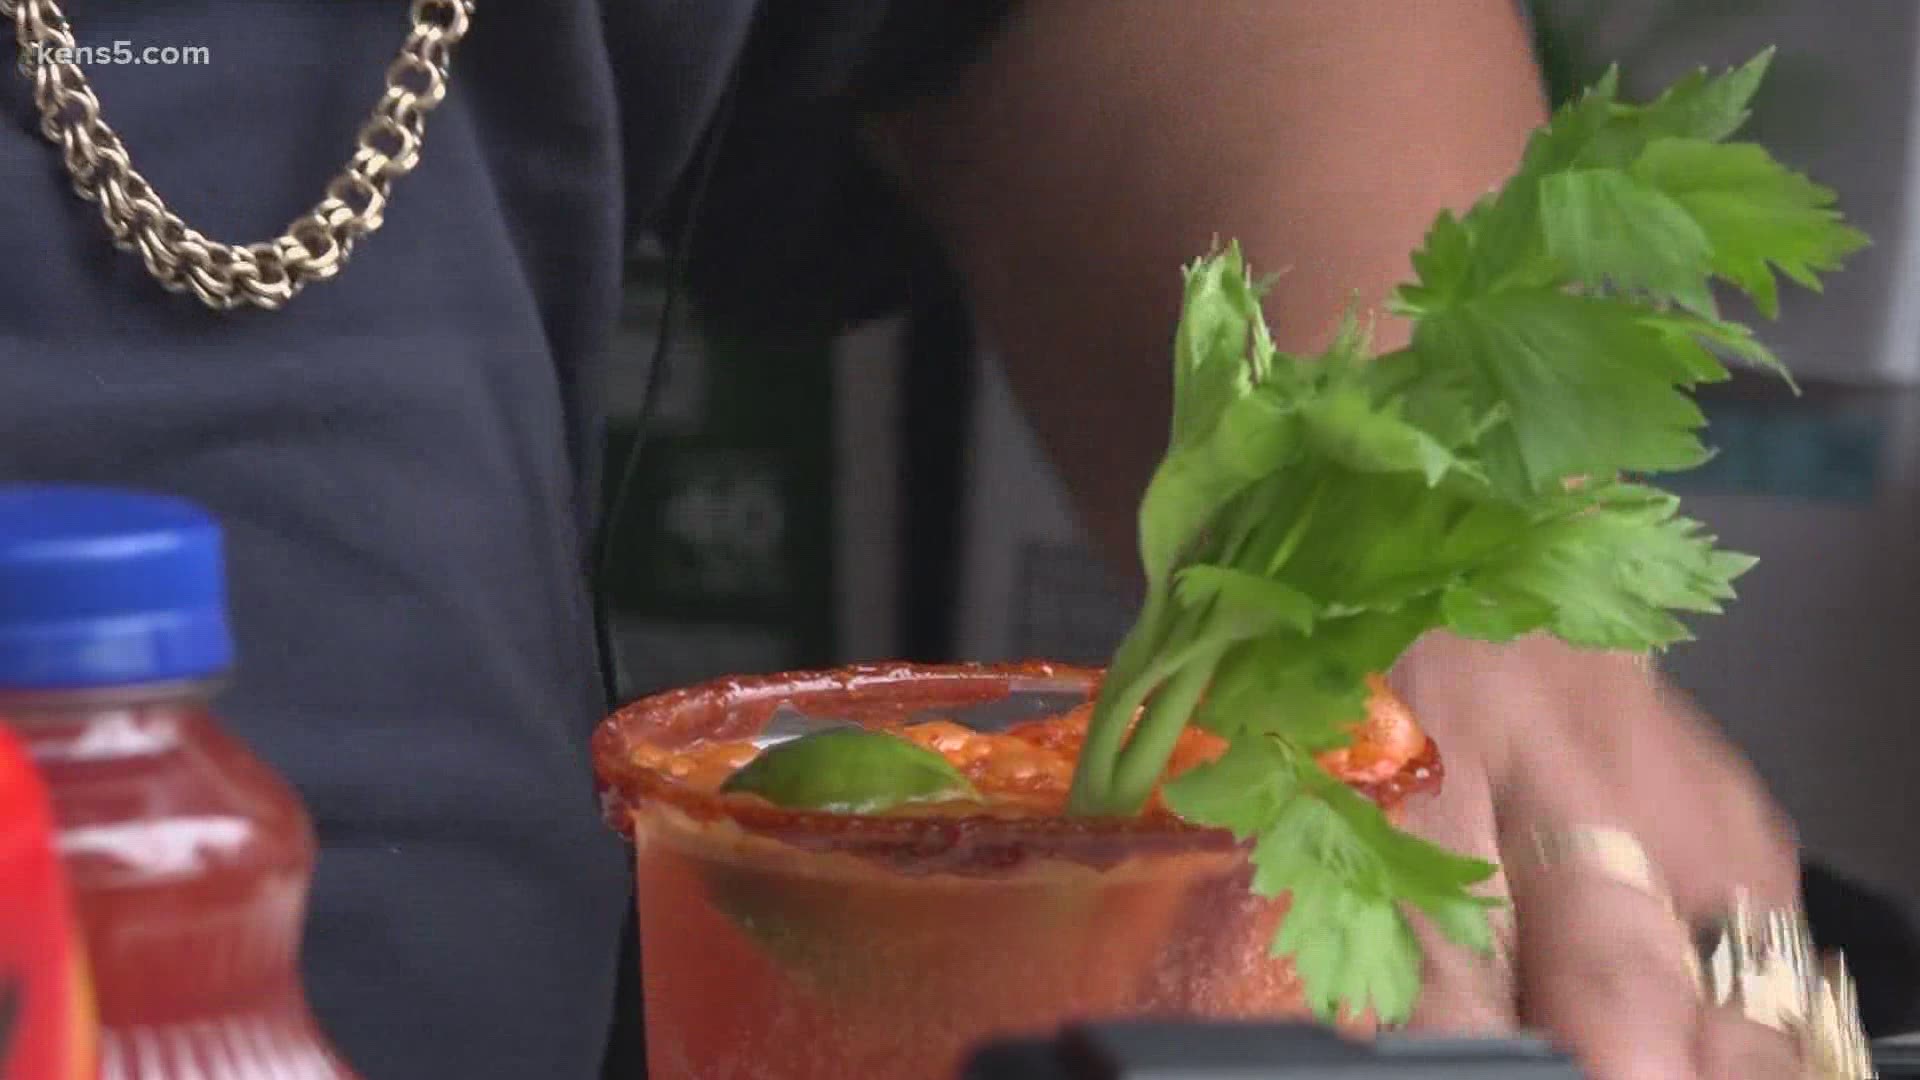 Fiesta in the summer means it's brutally hot, but a michelada can help beat the heat.